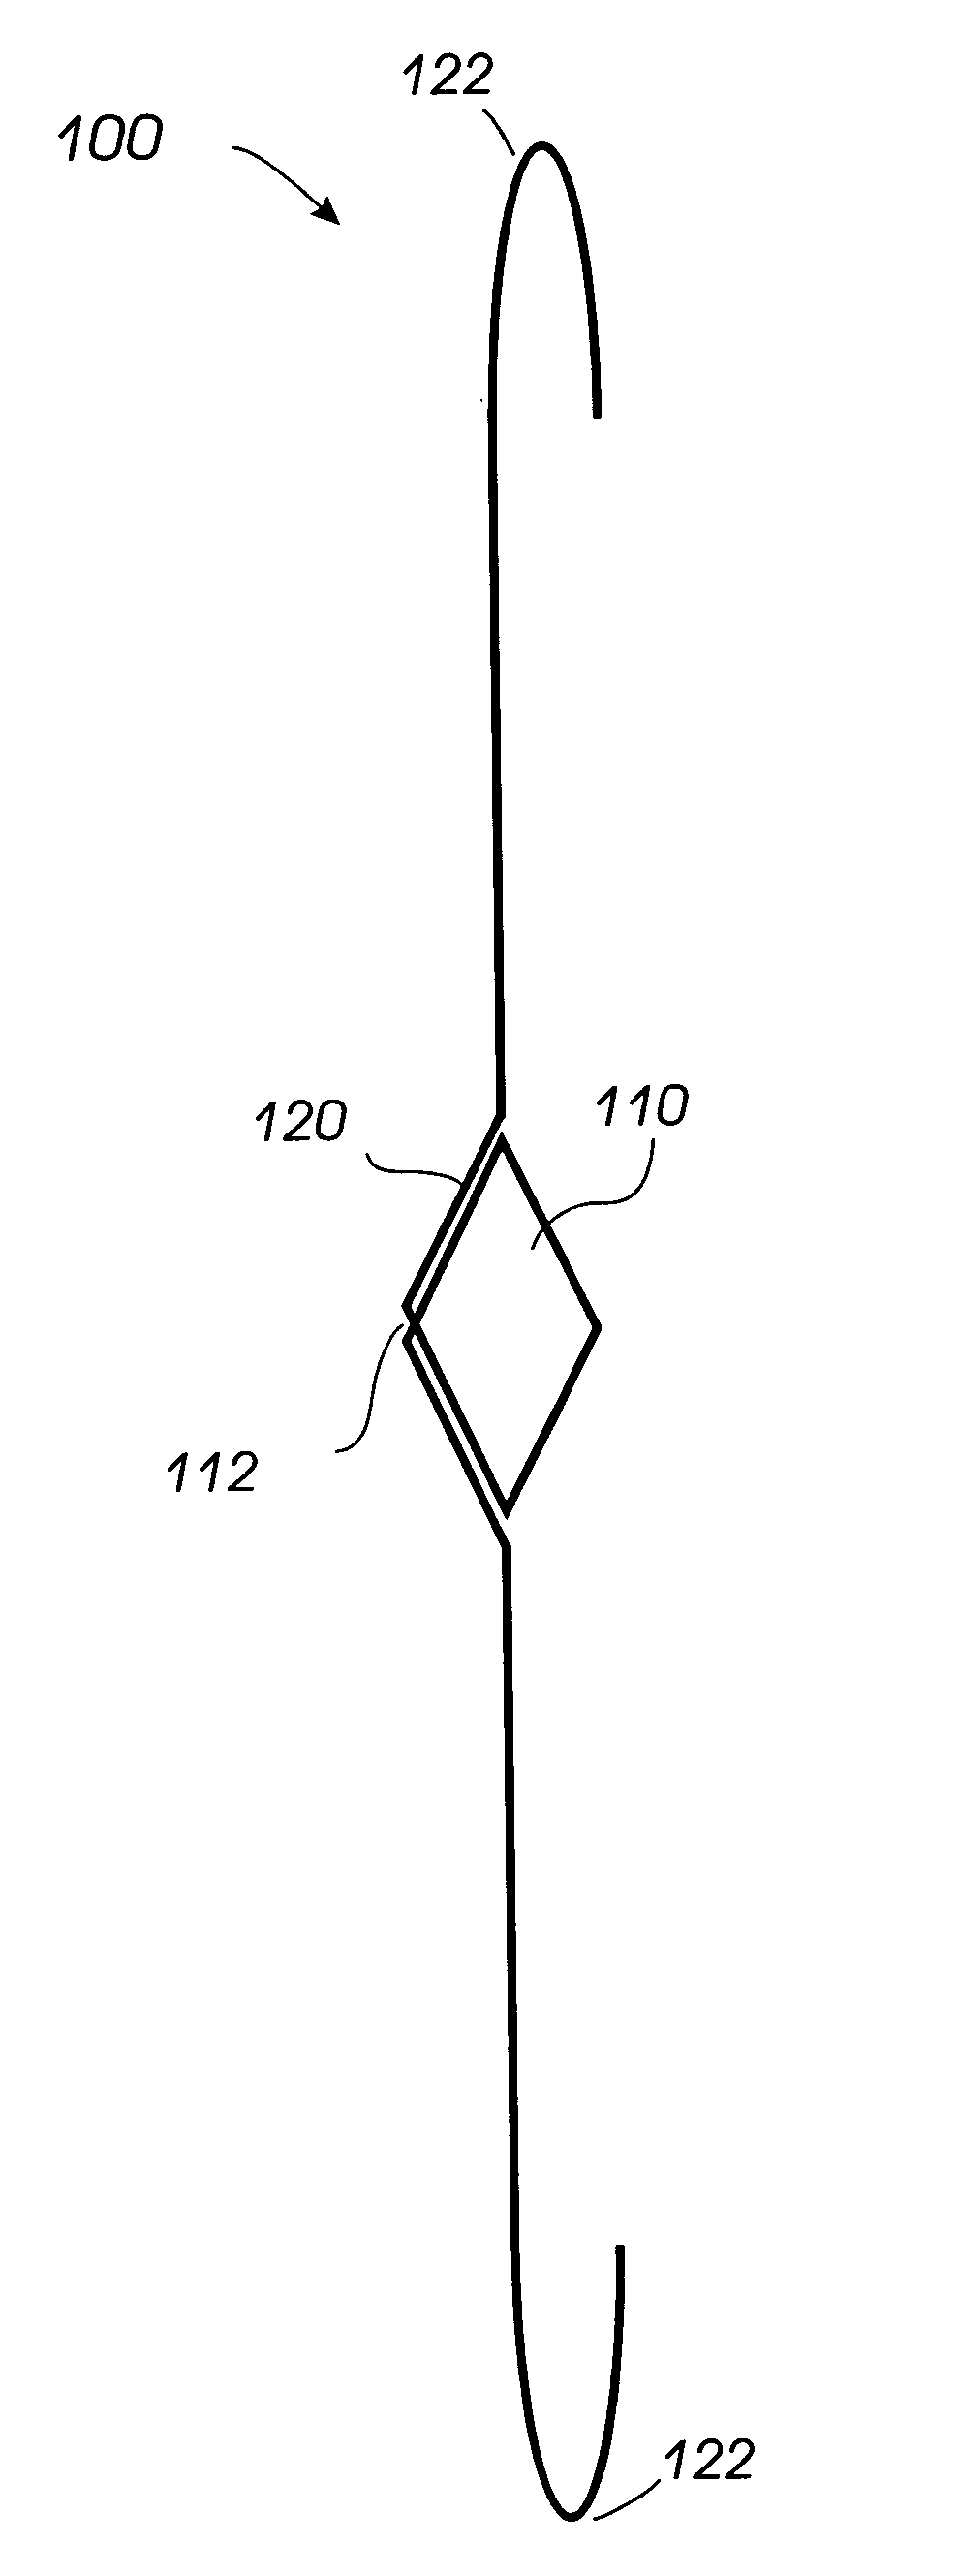 Apparatus and method for warping a loom